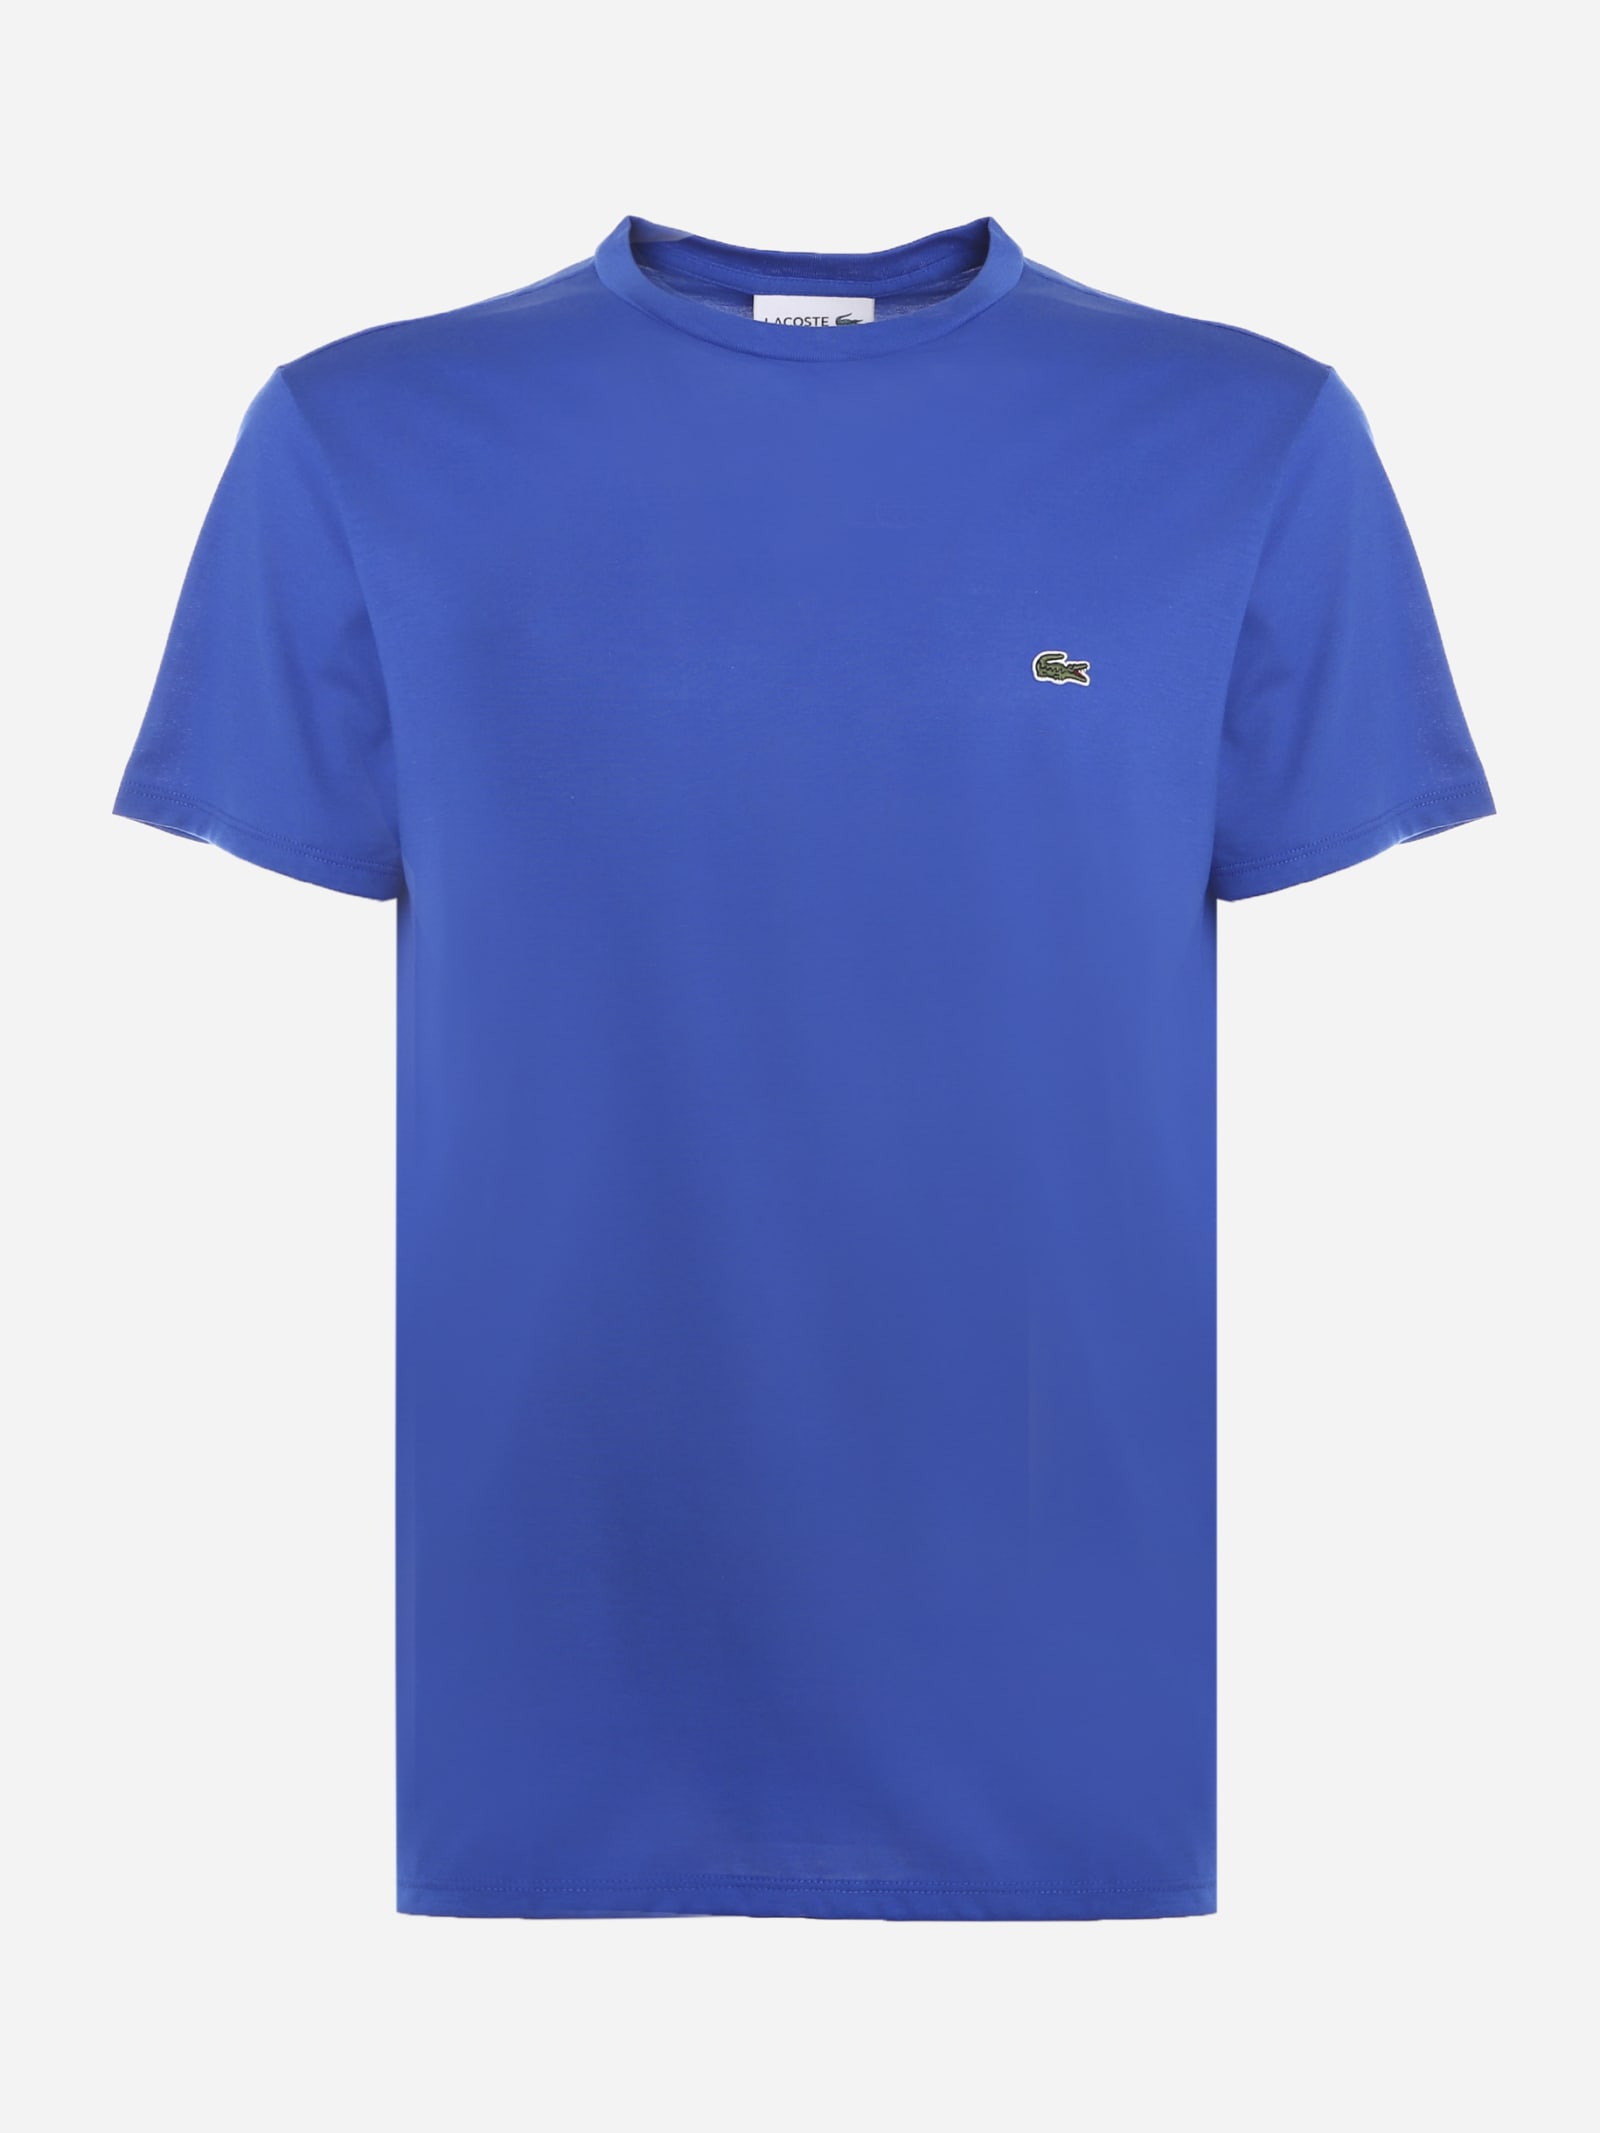 LACOSTE COTTON JERSEY T-SHIRT WITH EMBROIDERED LOGO,TH6709 -HJM